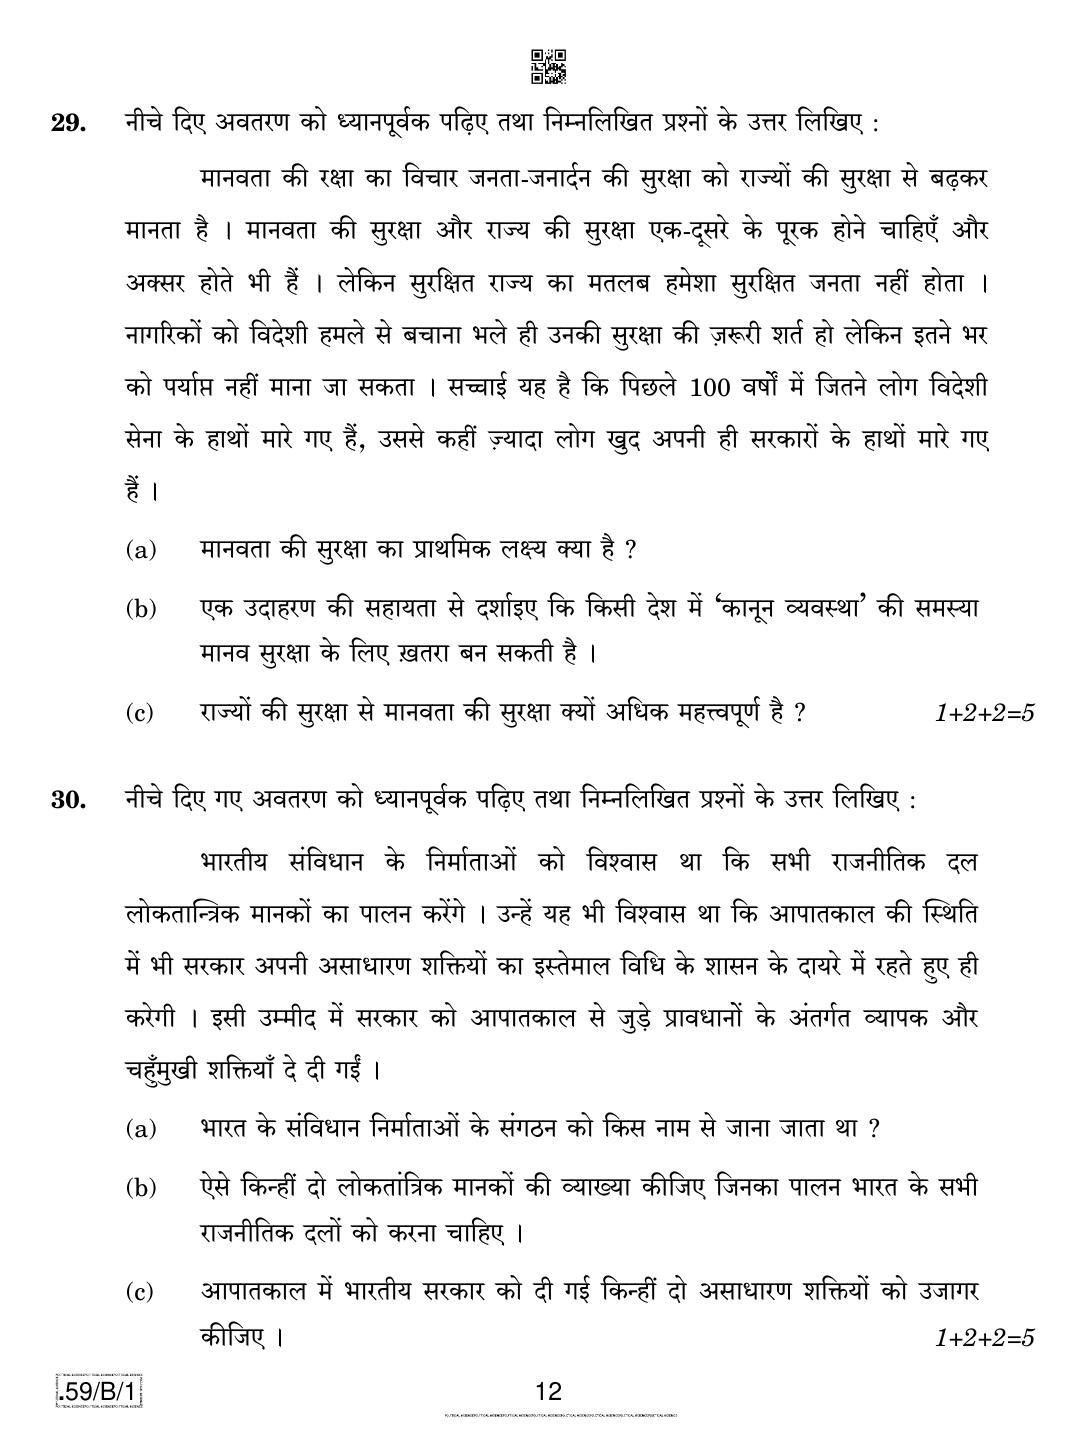 CBSE Class 12 59-C-1 - Political Science 2020 Compartment Question Paper - Page 12